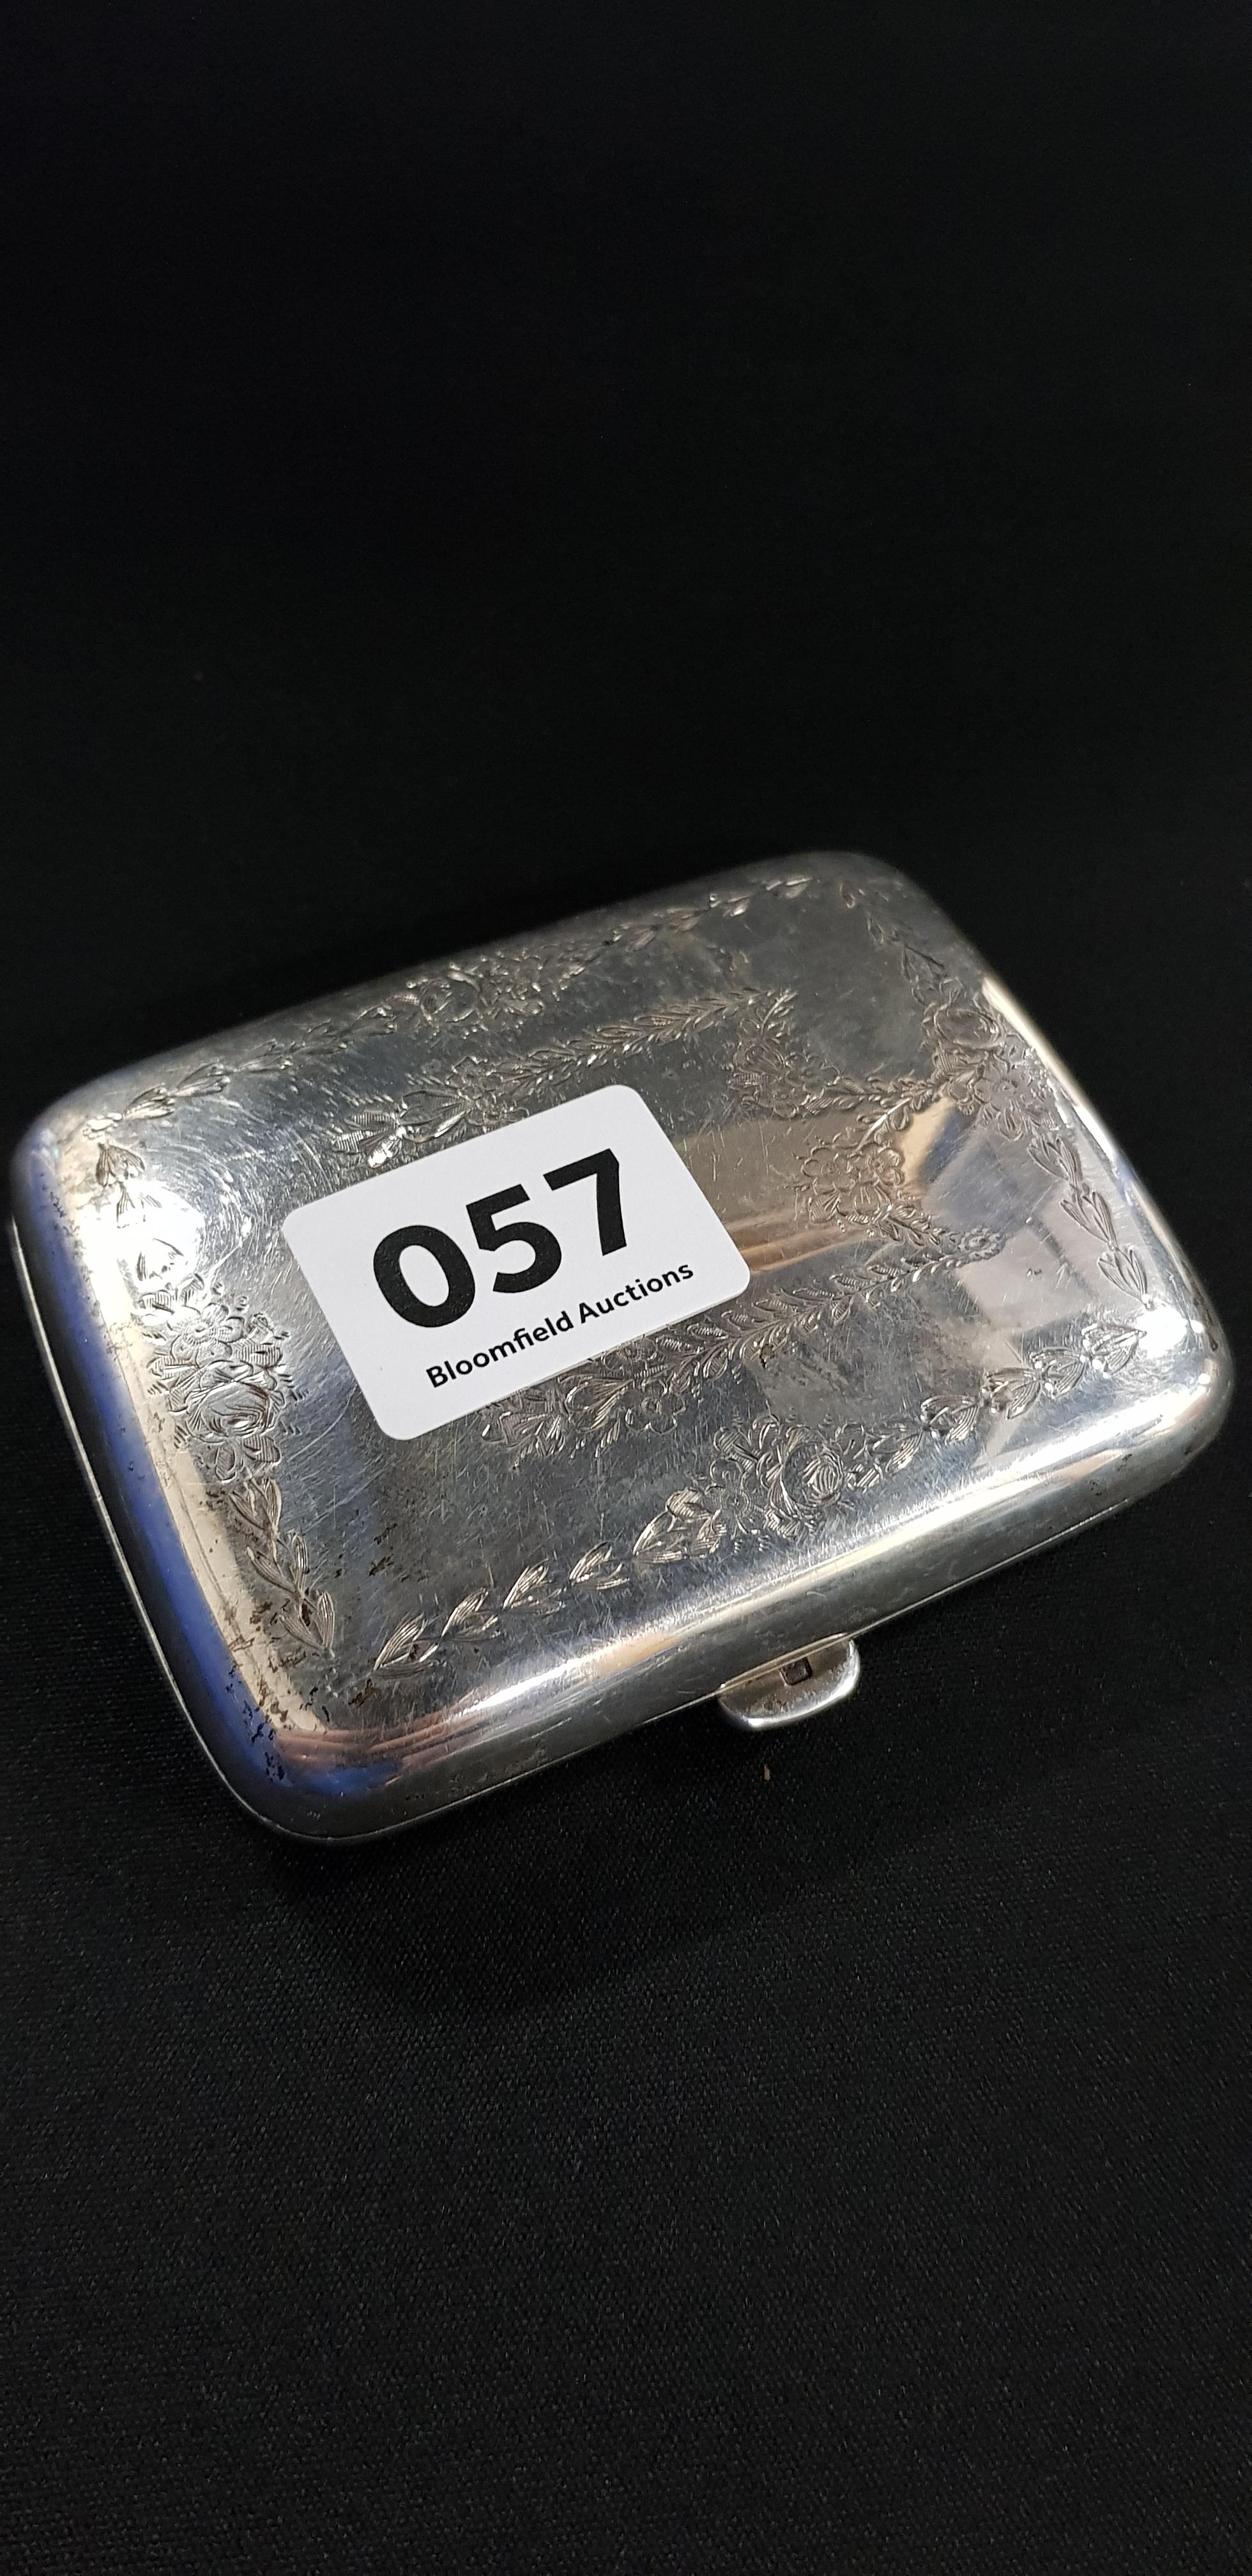 SILVER CIGARETTE CASE - WALKER AND HALL SHEFFIELD 1917 APPROX 108G